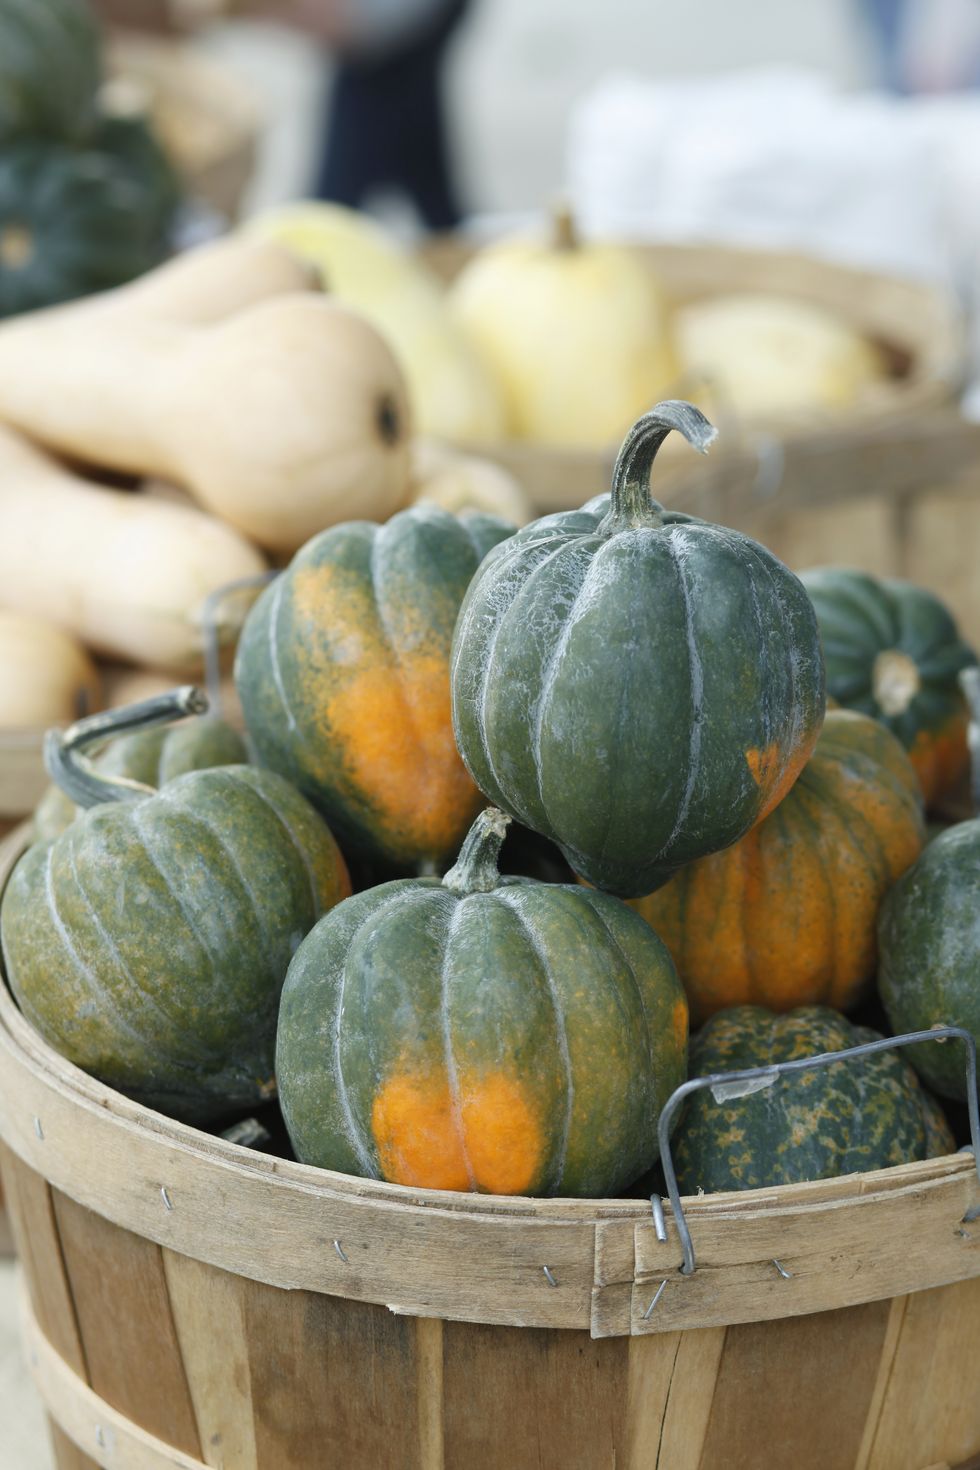 25 Best Fall Fruits and Vegetables - The Best Autumn Produce